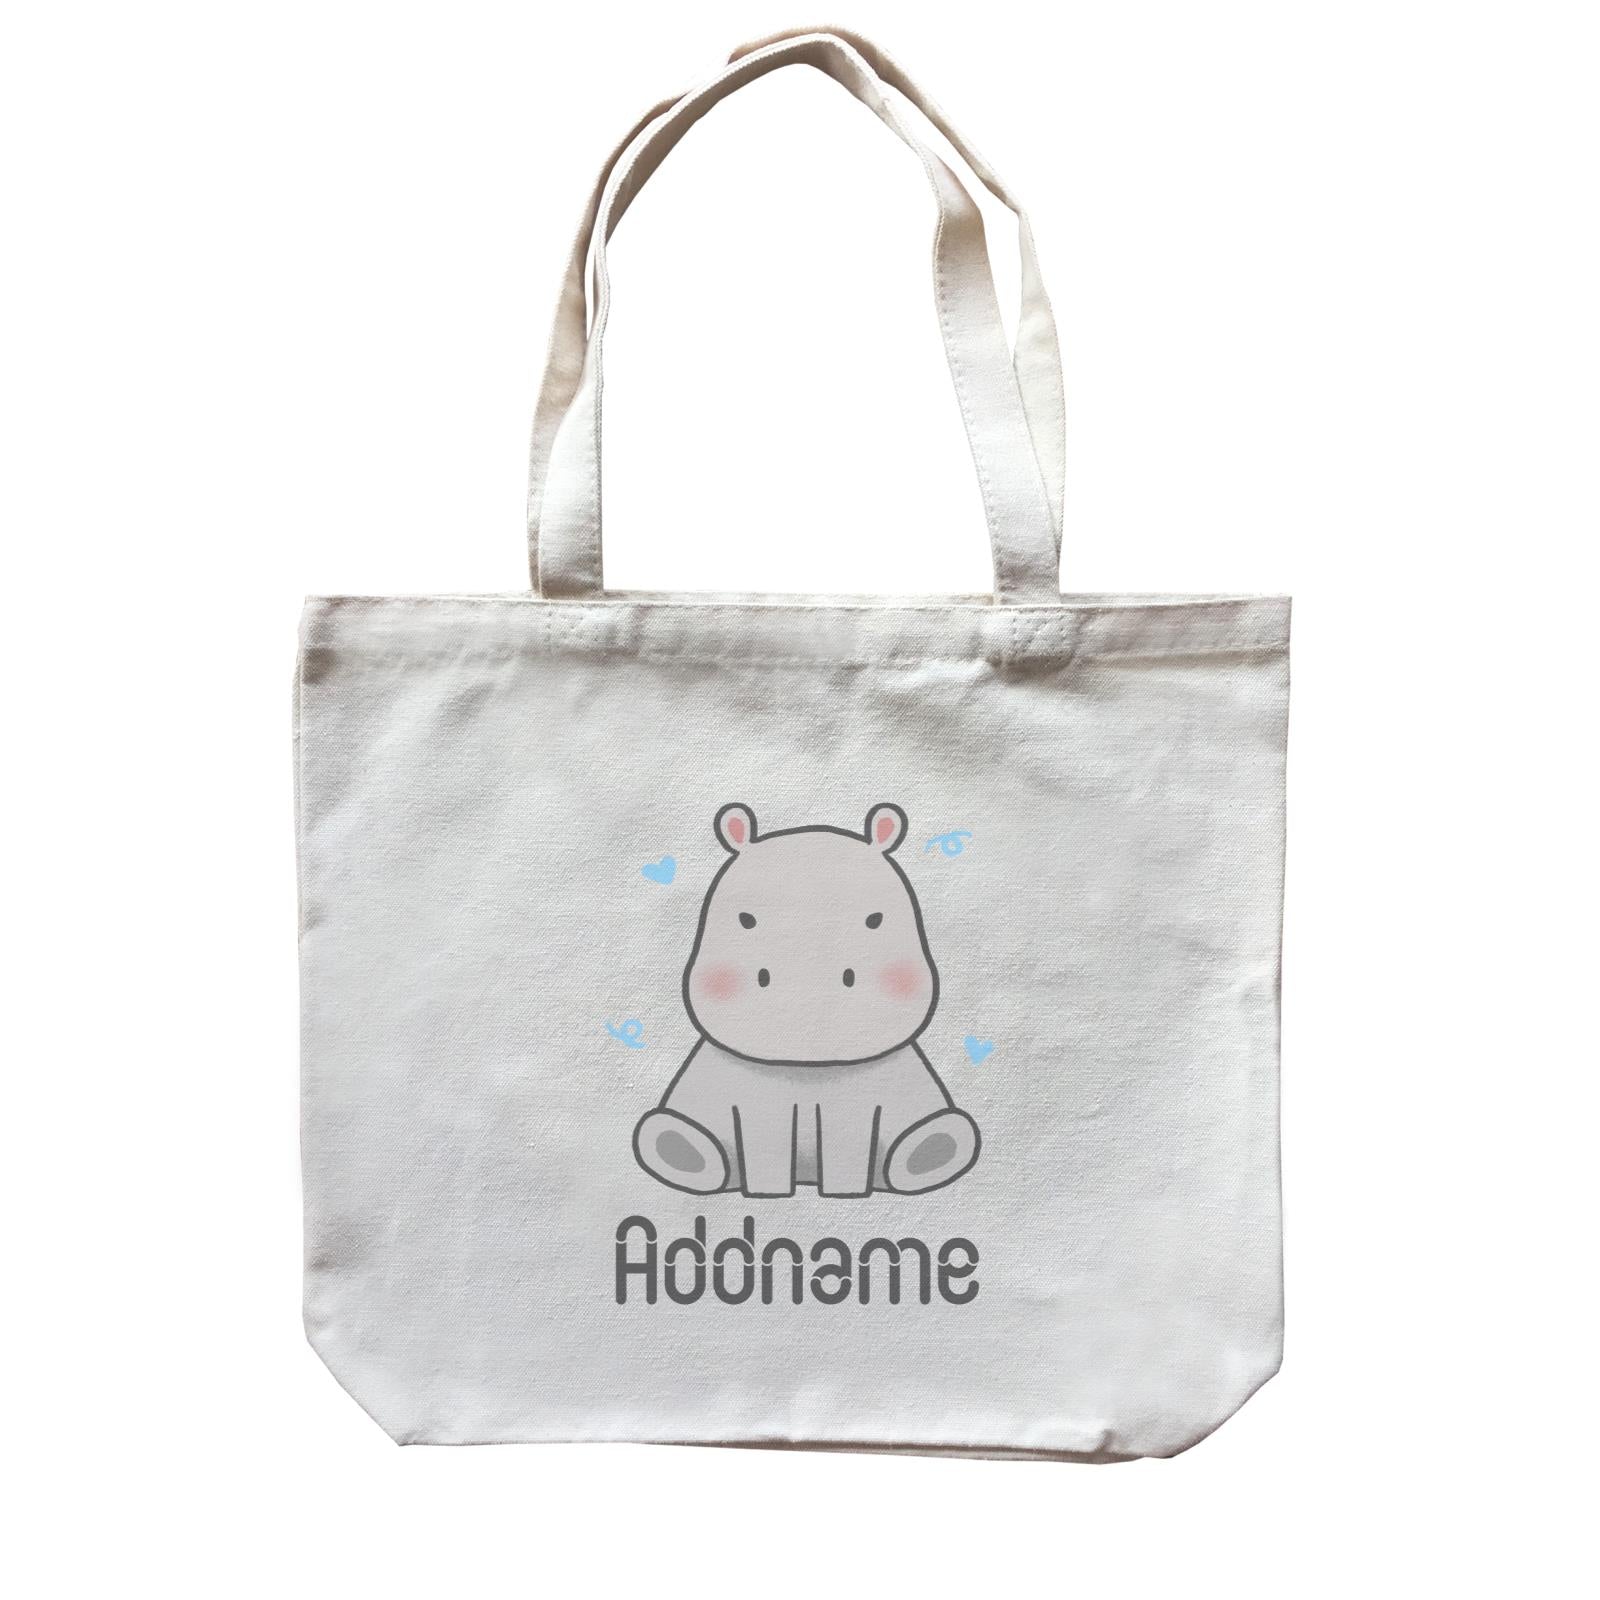 Cute Hand Drawn Style Hippo Addname Canvas Bag